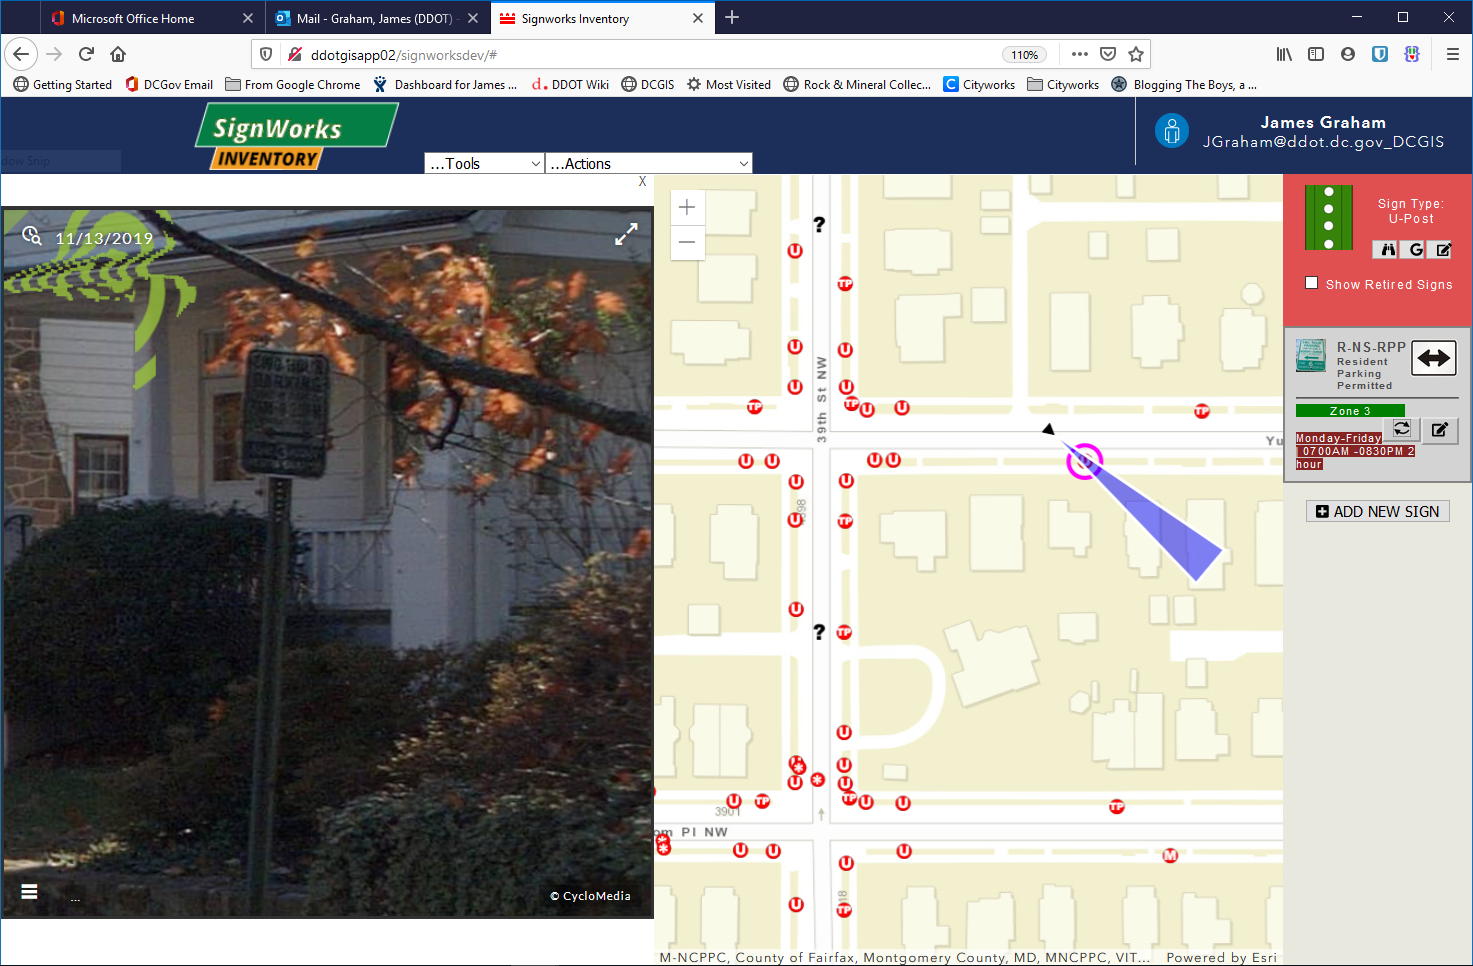 screenshot of the Signworks inventory manager displaying a map marked with locations of street signs, an arrow pointing to the selected street sign, a photo of that street sign, and a block of information about that street sign